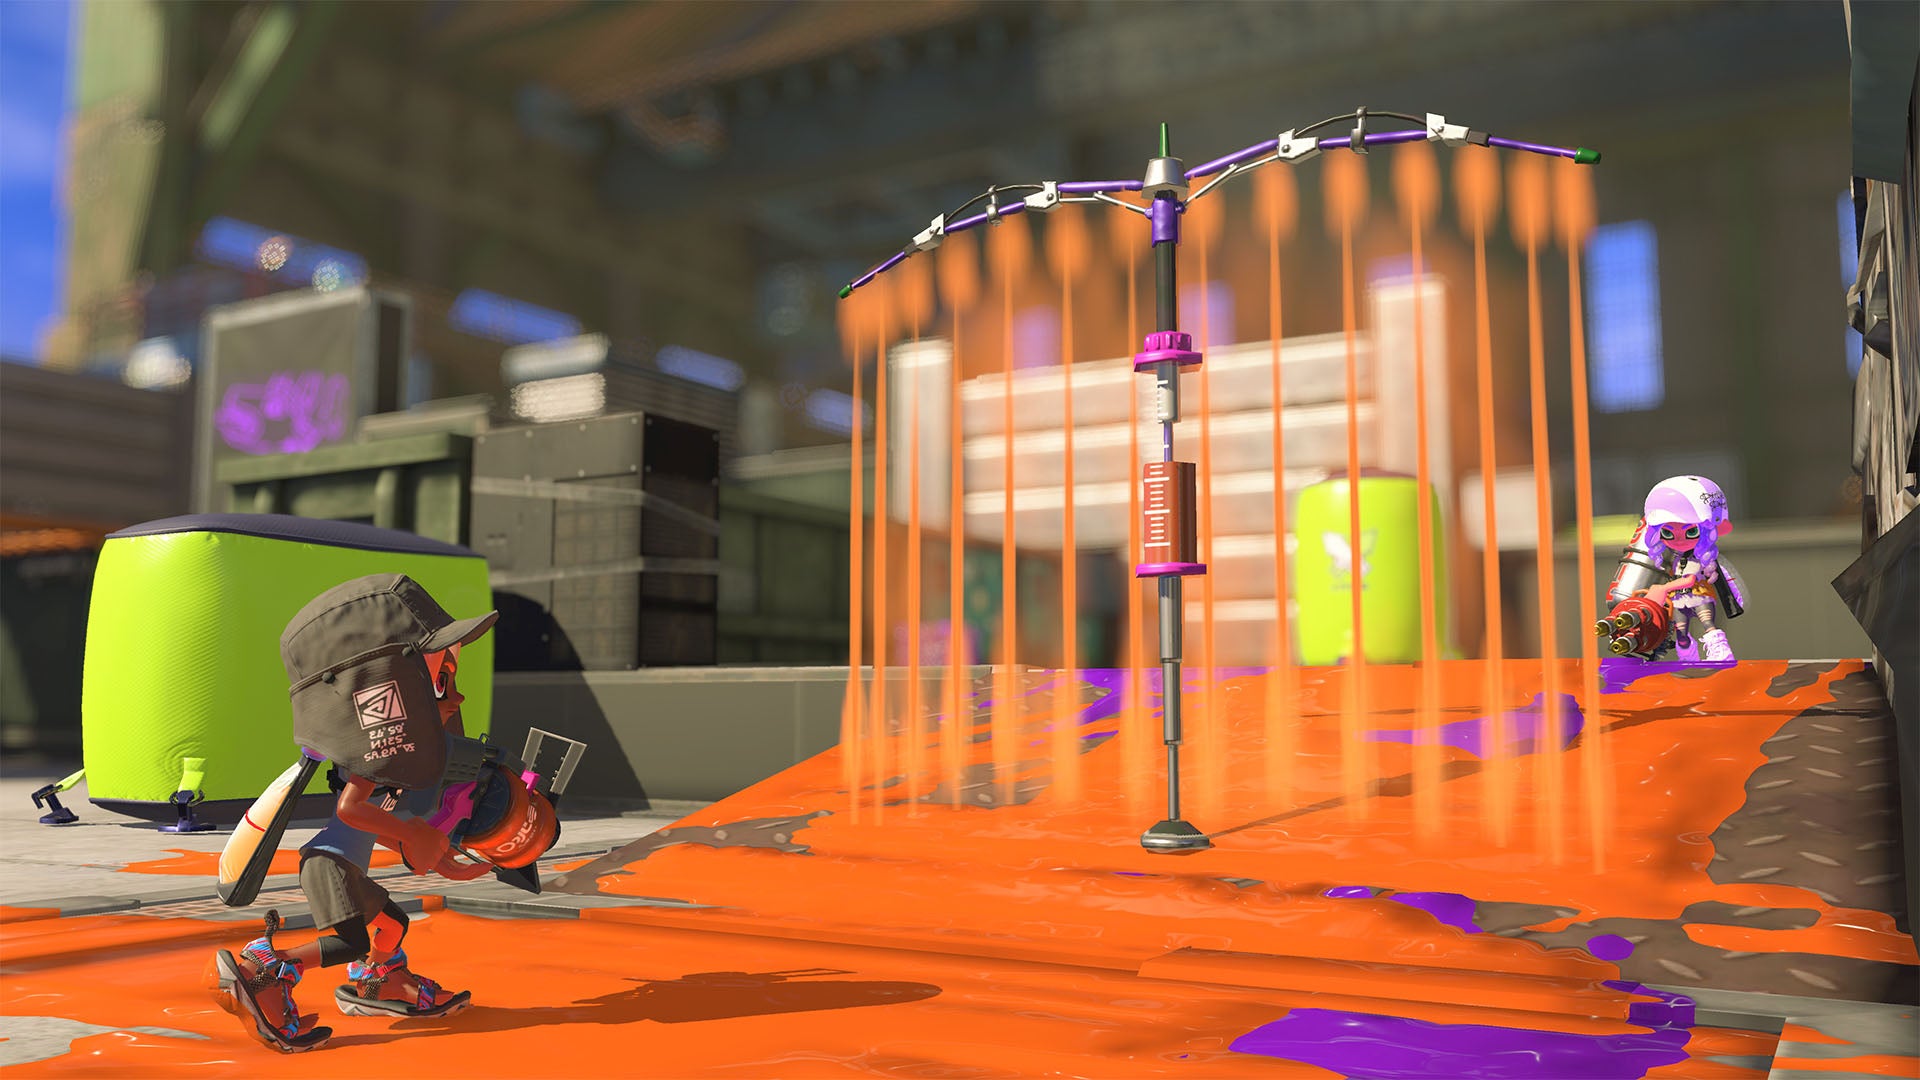 Two players in Splatoon 3 prepare to face - splat - each other